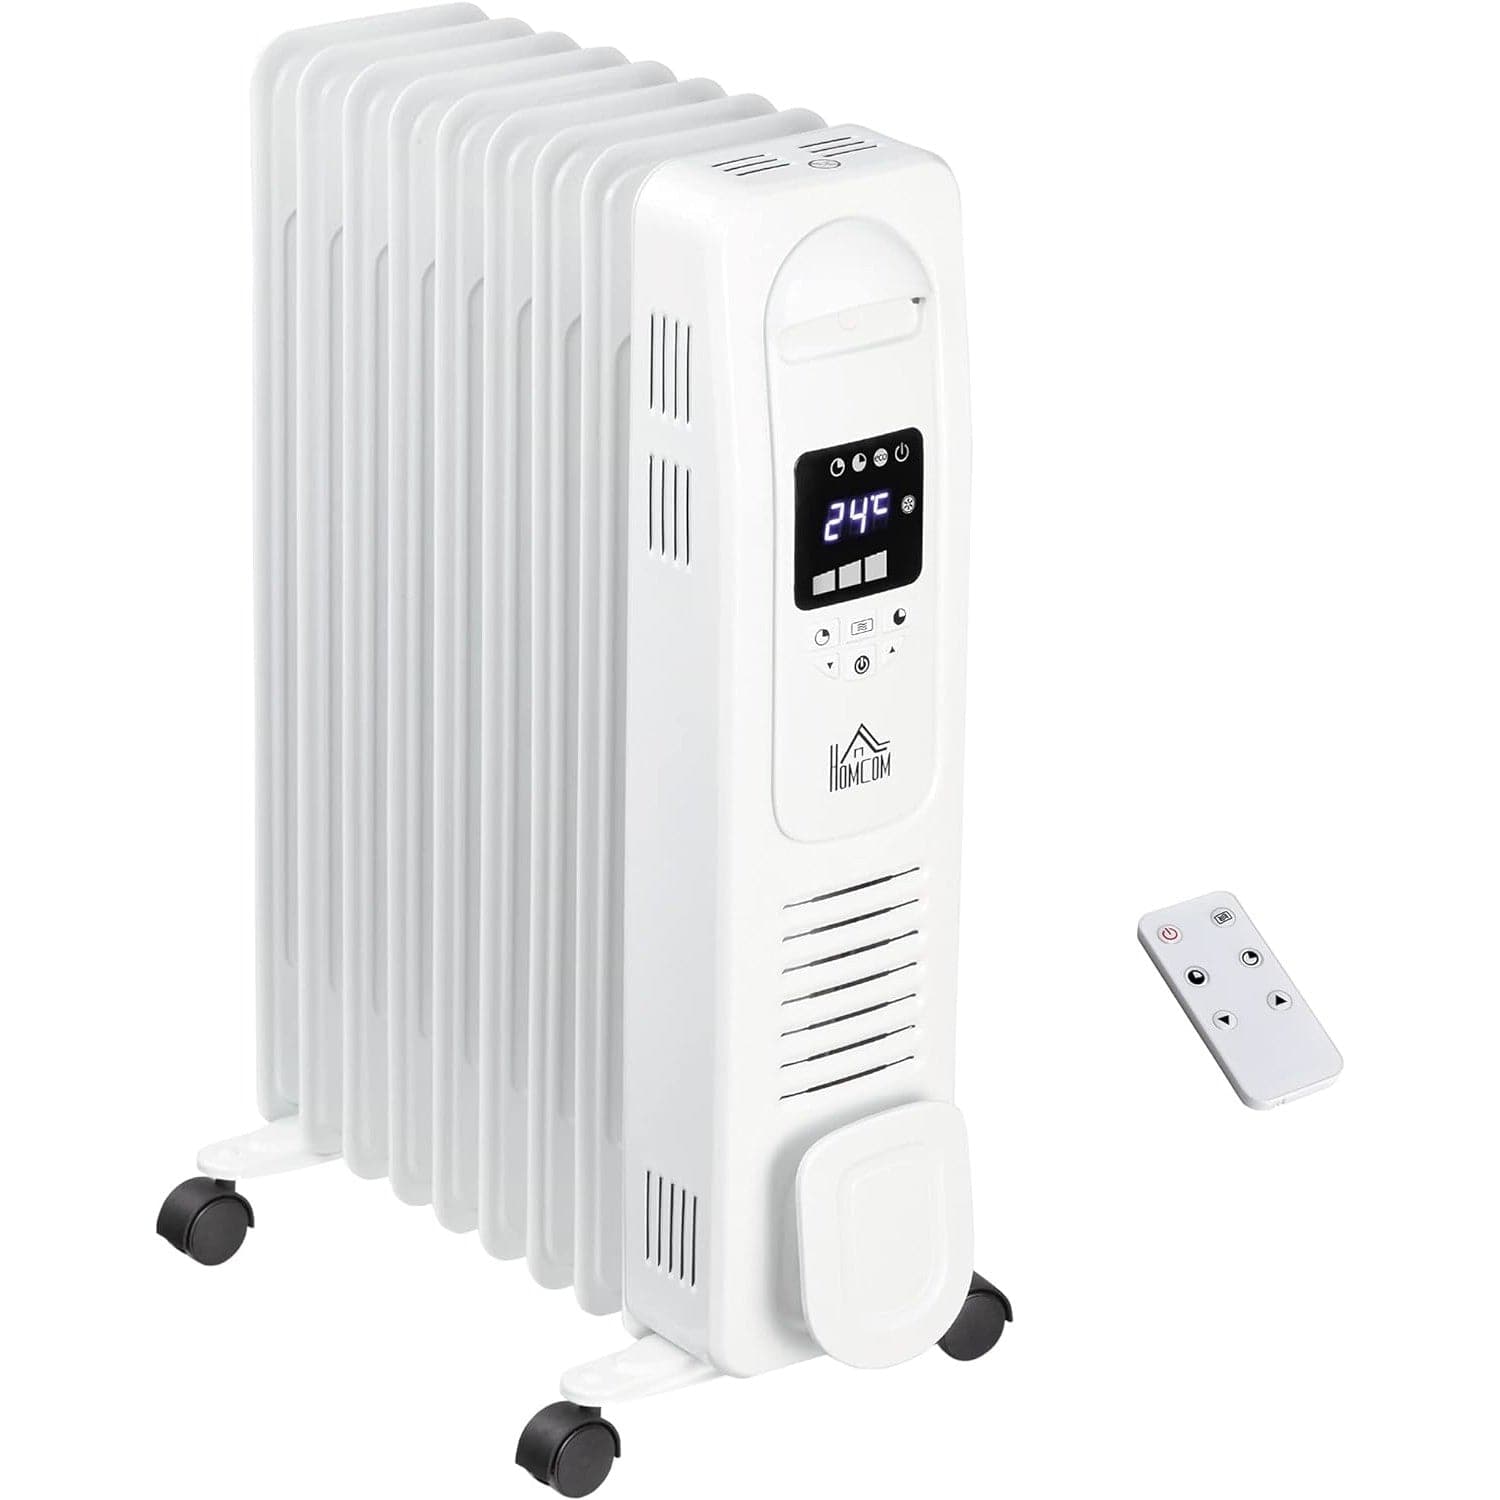 Maplin 2180W Digital 9 Fin Portable Electric Oil Filled Radiator with LED Display, Timer, 3 Heat Settings, Safety Cut-Off & Remote Control (White)